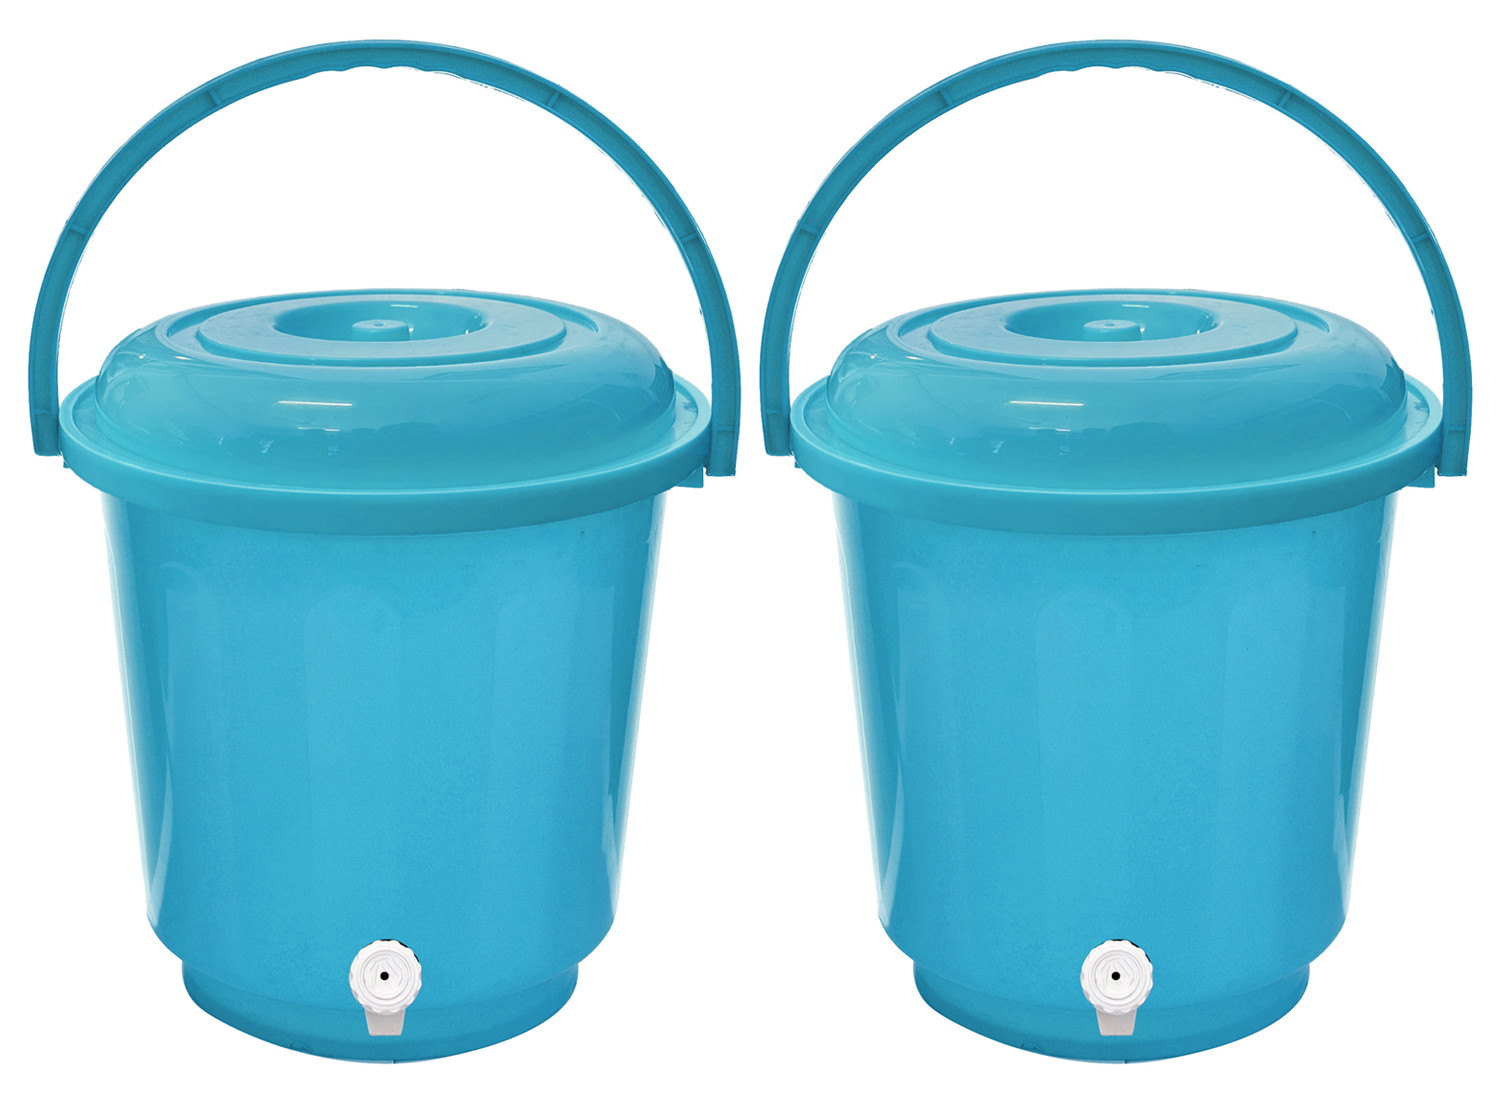 Kuber Industries Multipurposes Plastic Bucket With Lid & Tap System For Home Cleaning & Save Water, 18Ltr. (Blue)